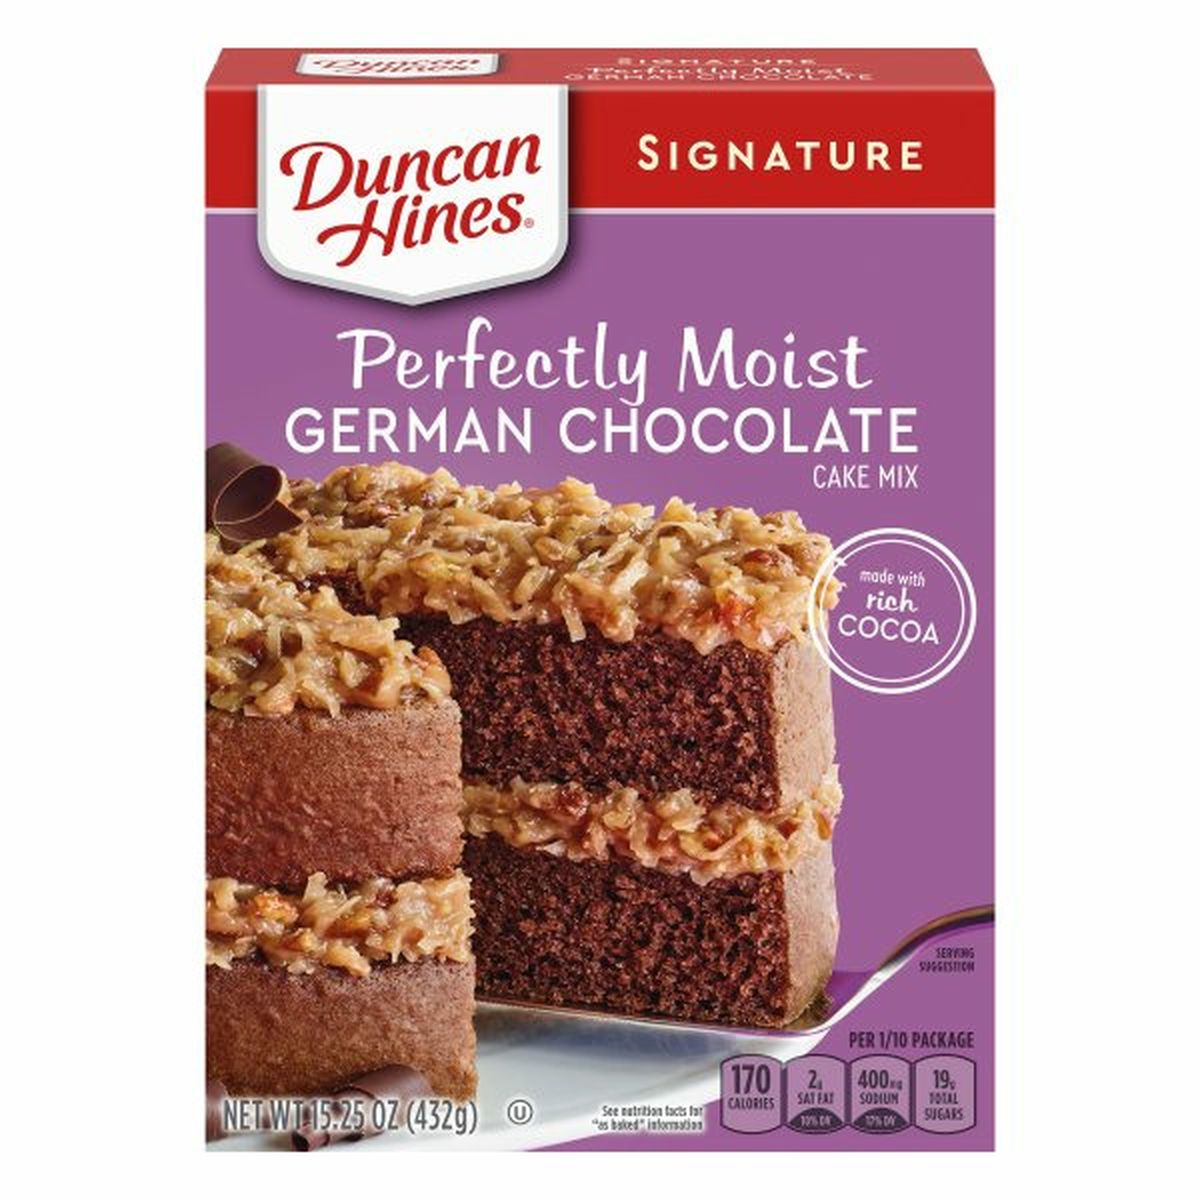 Calories in Duncan Hines Signature Cake Mix, German Chocolate, Perfectly Moist